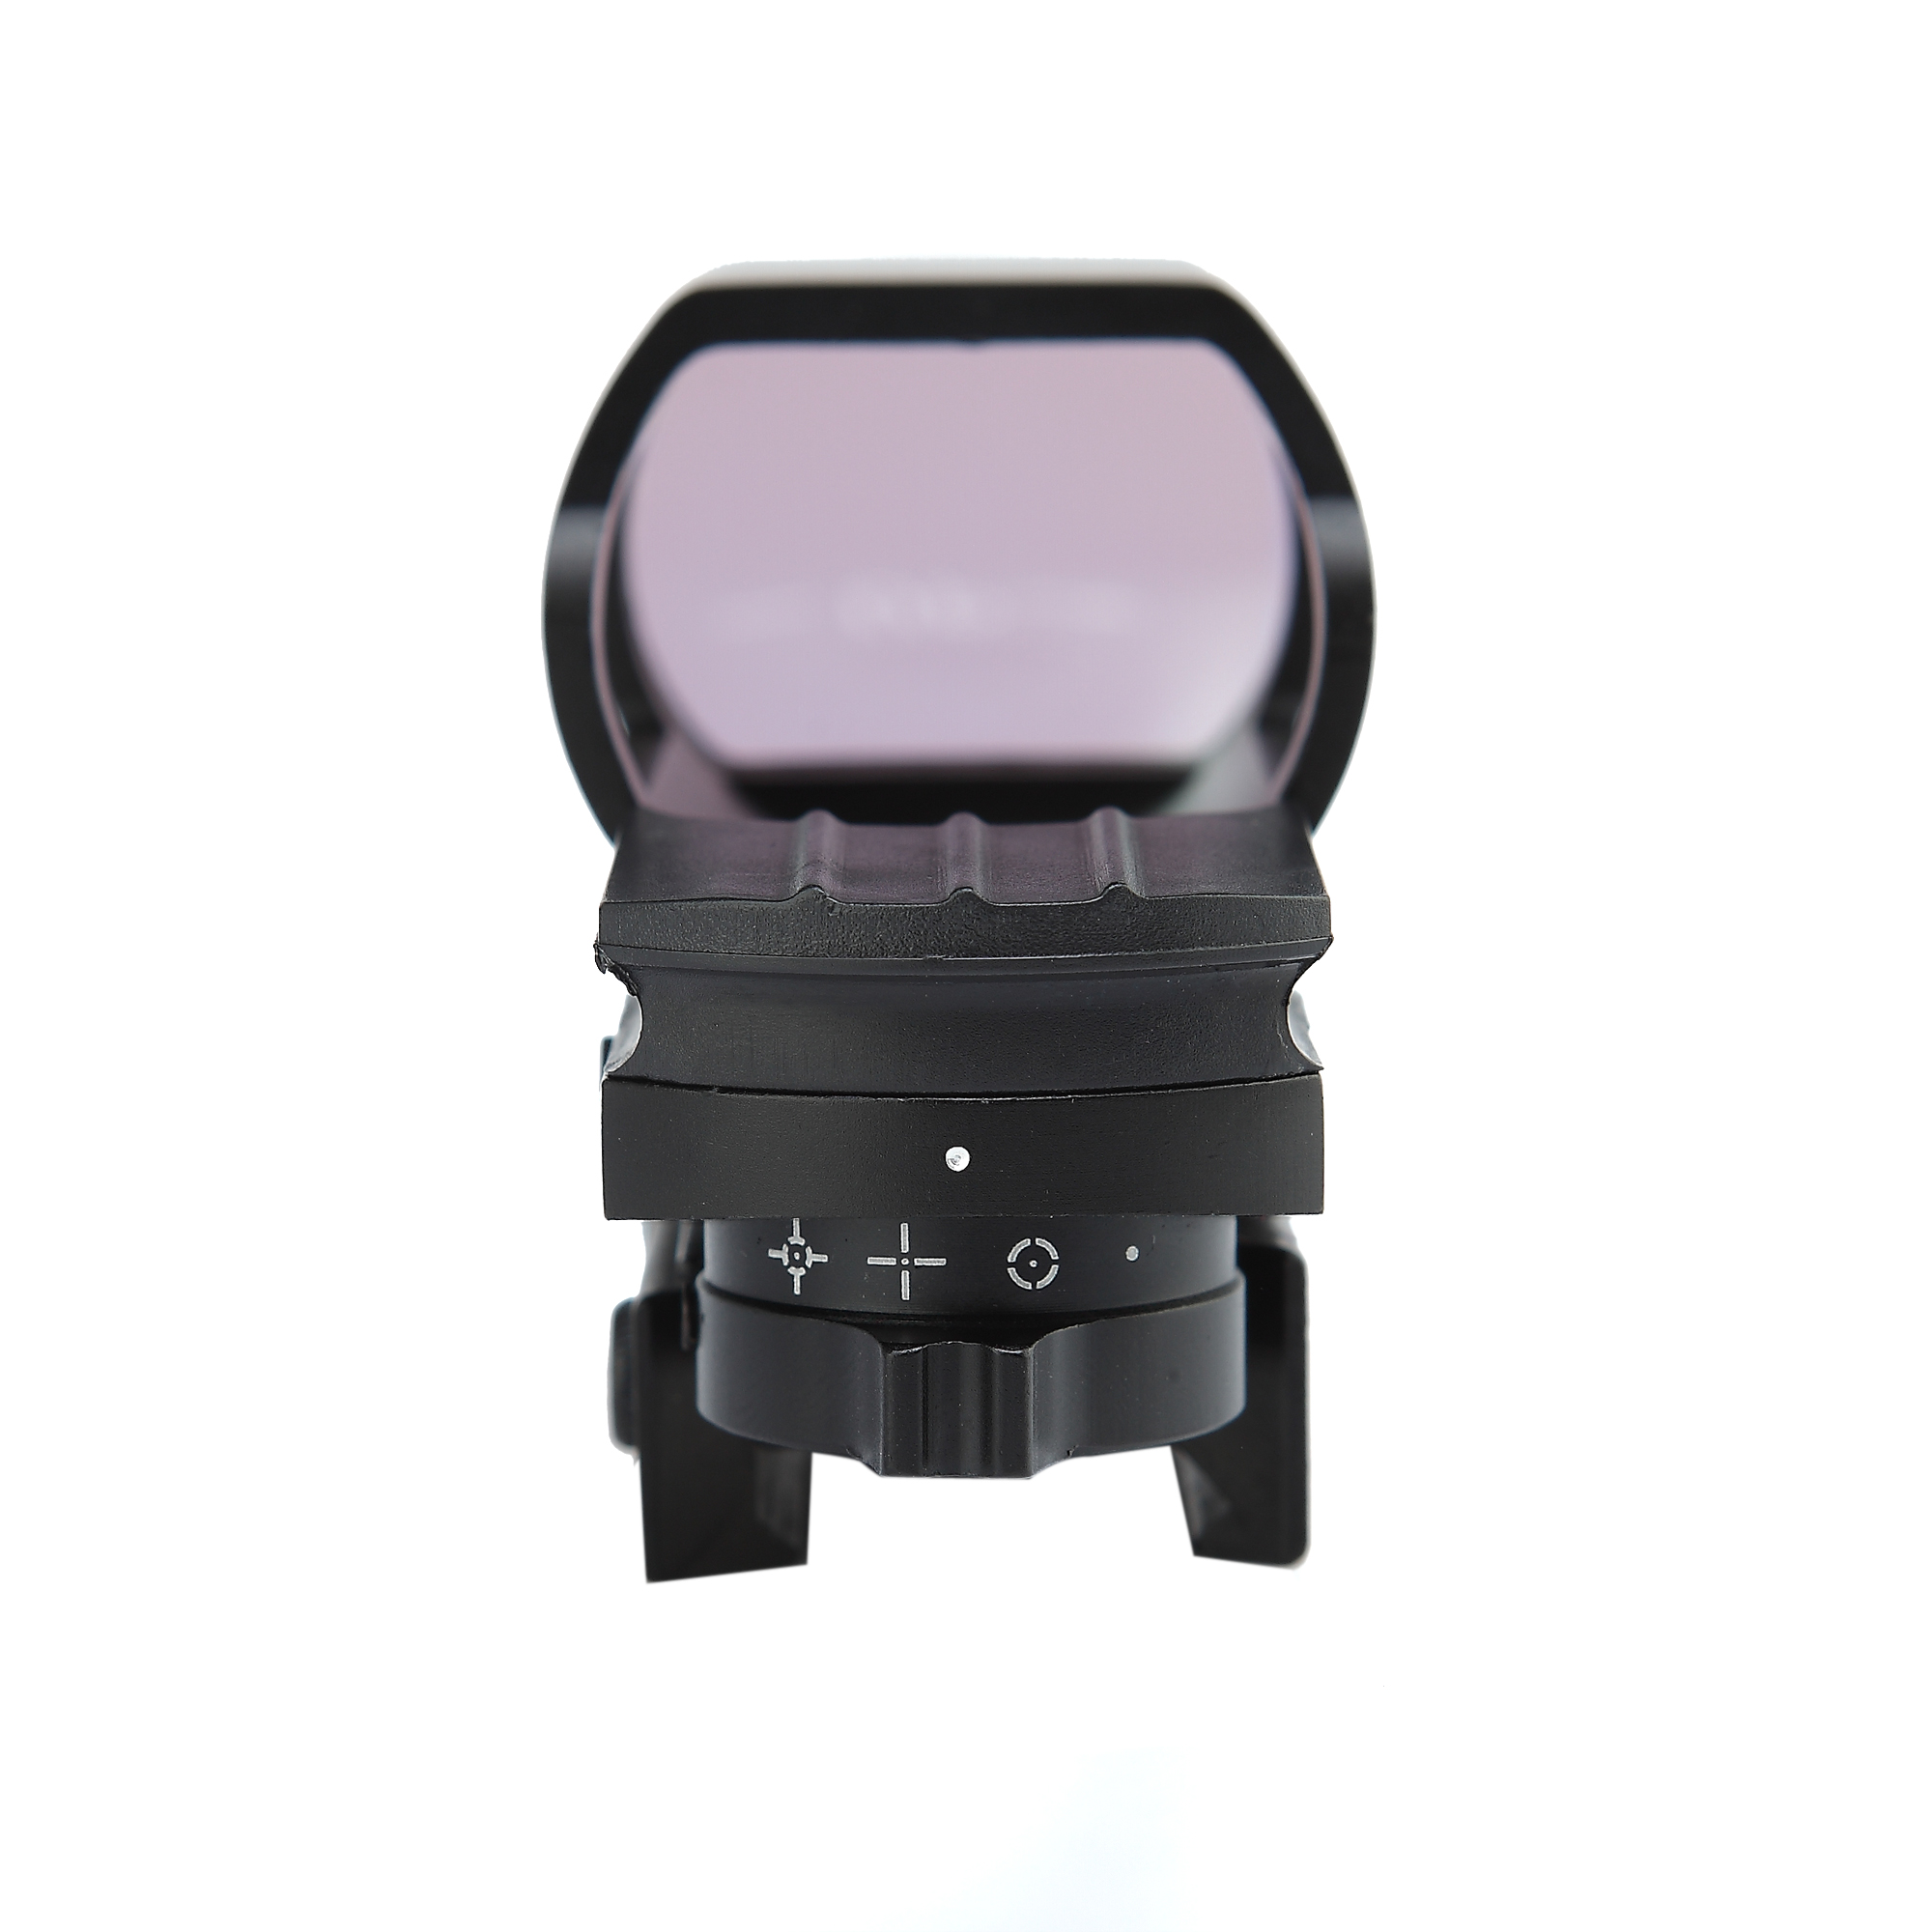  Red & Green Dot Sight 4 Reticles Reflex Sight ON & Off Switch for 20mm Rail Mount